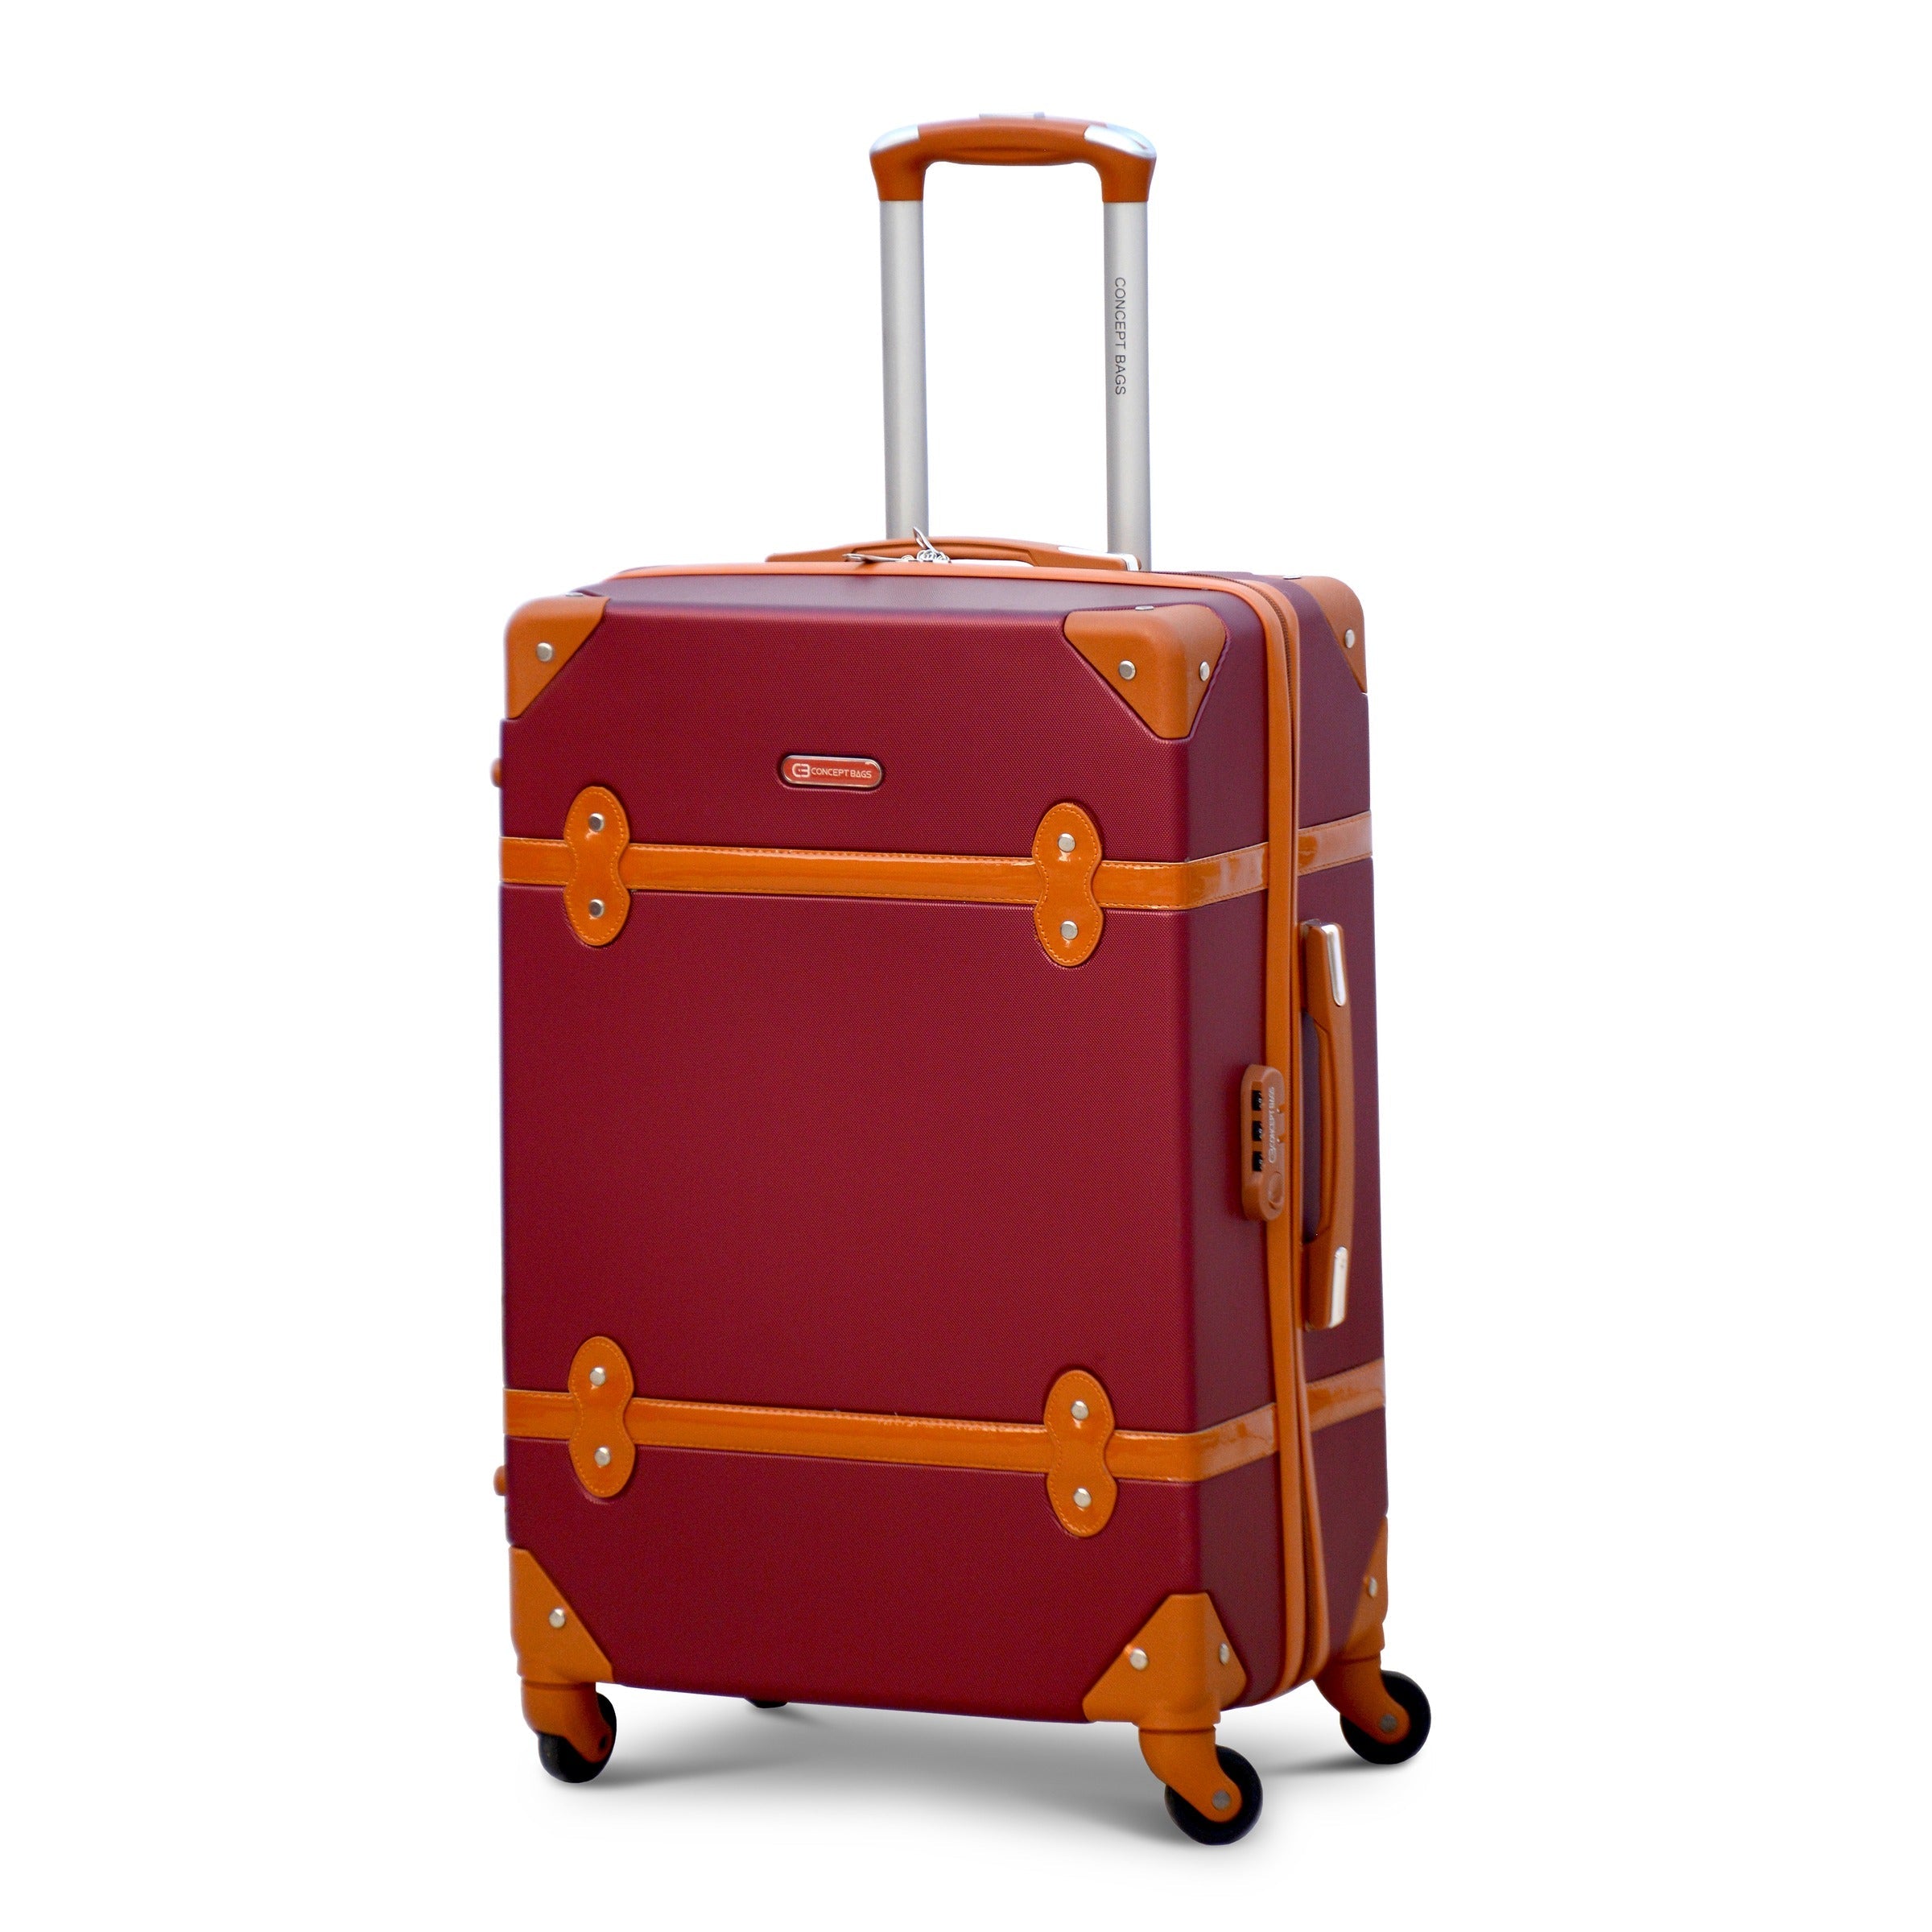 Corner Guard Lightweight 20 inches Hardcase ABS Luggage | Burgundy Colour | 2 Year Warranty